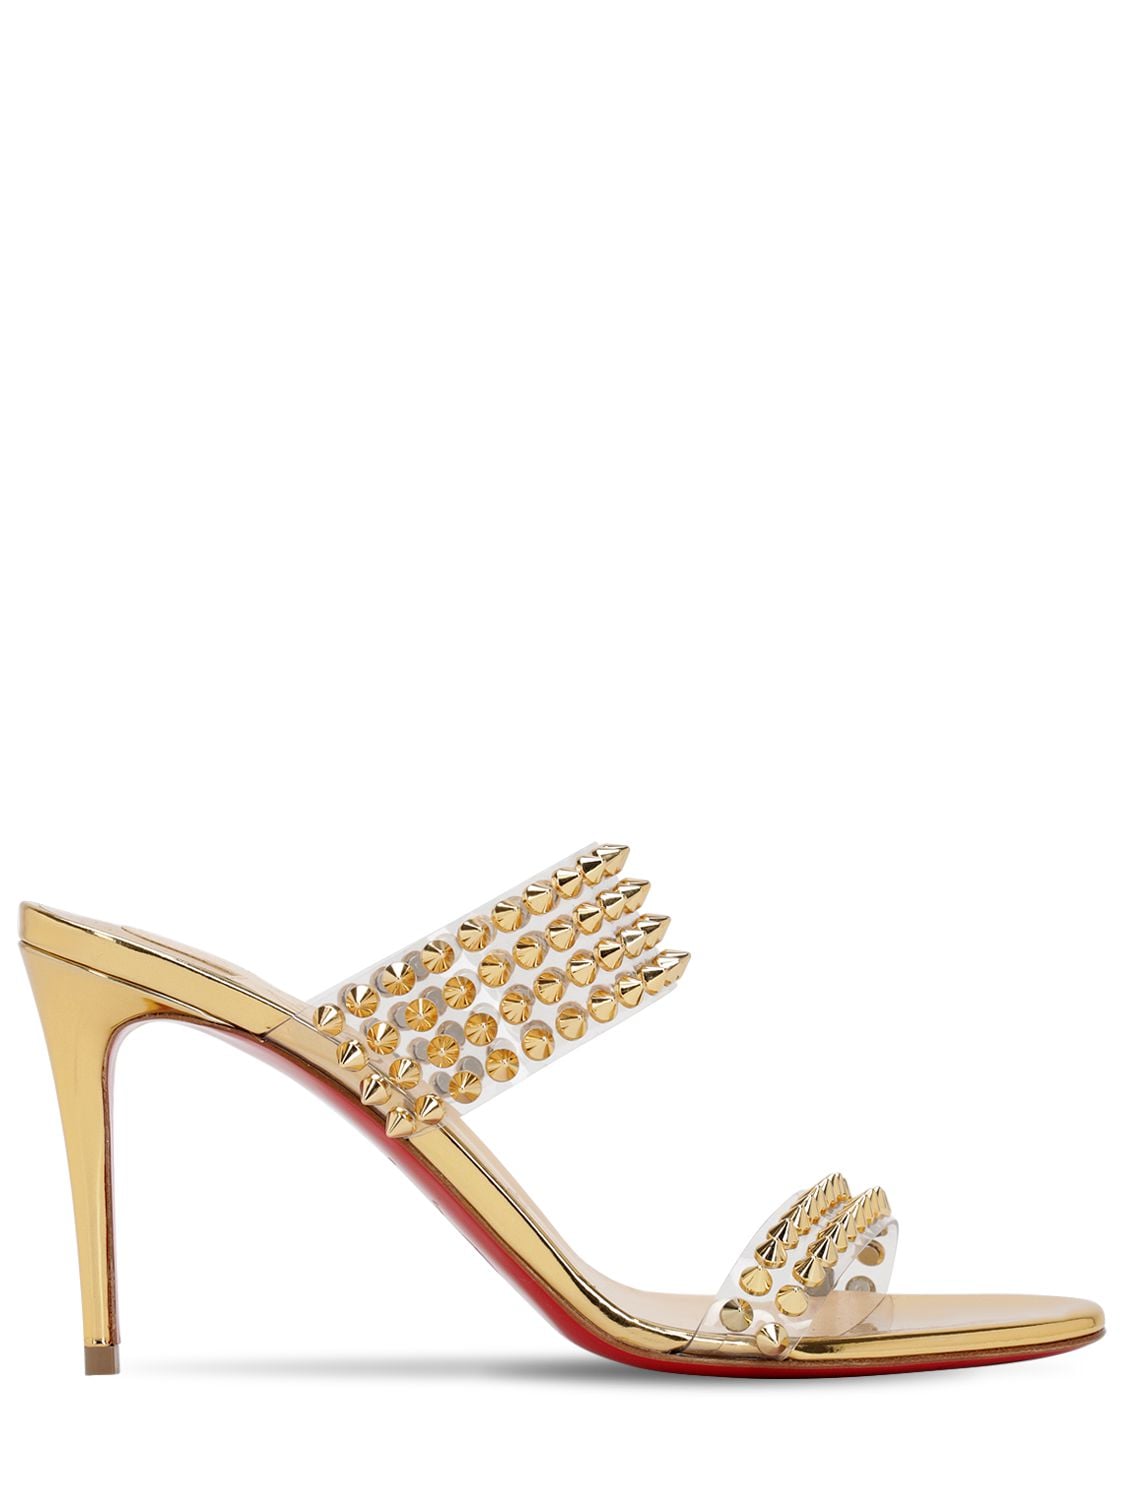 CHRISTIAN LOUBOUTIN 85MM SPIKES ONLY PLEXI & LEATHER SANDALS,70IACH008-MZI3MW2